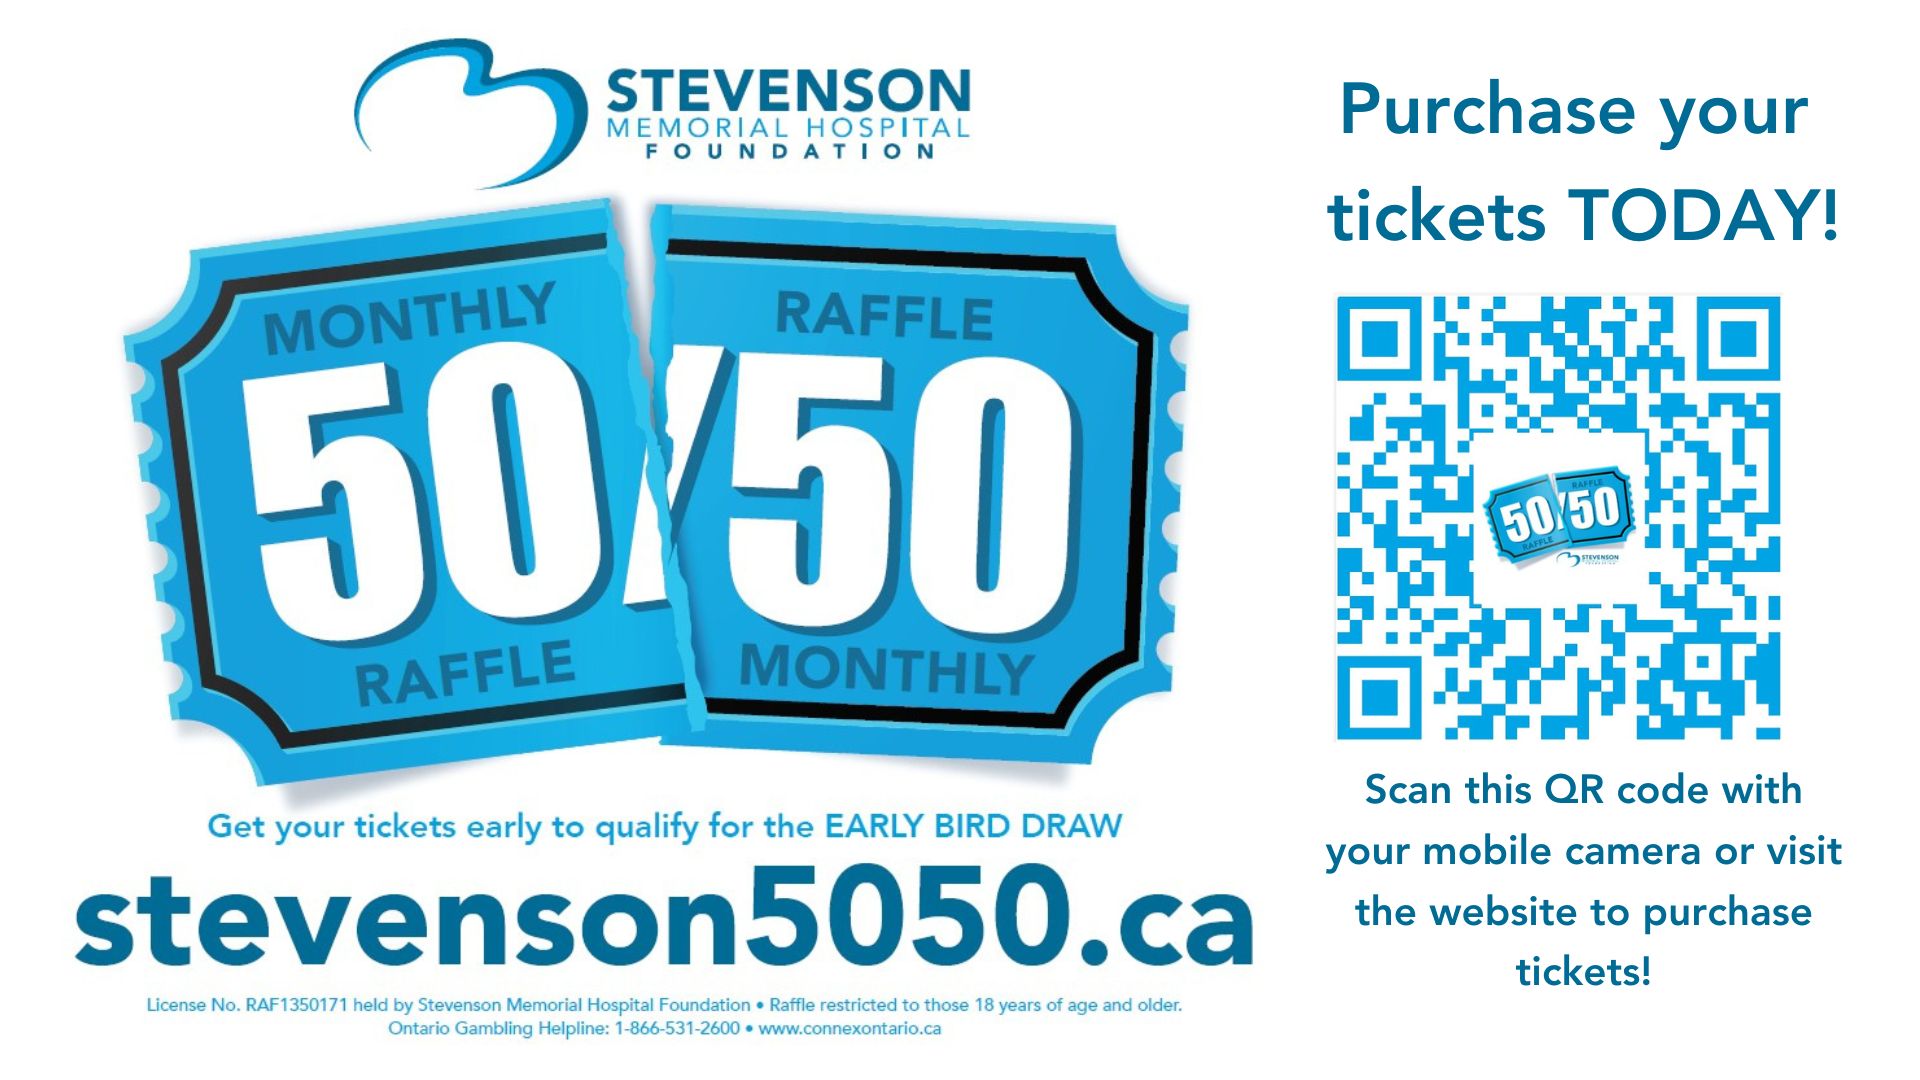 50 50 Draw tickets available